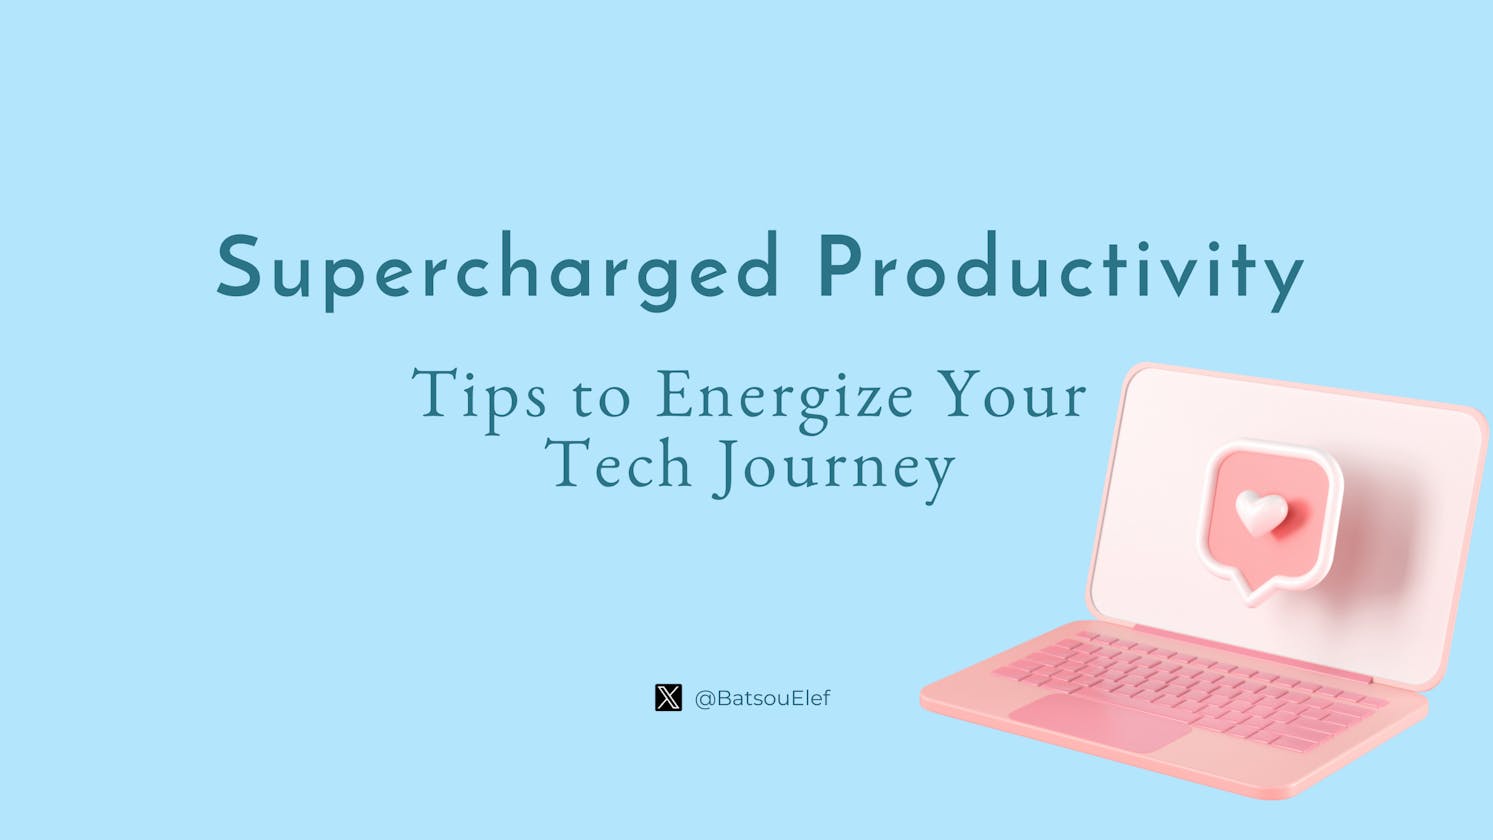 Supercharged Productivity: Tips to Energize Your Tech Journey